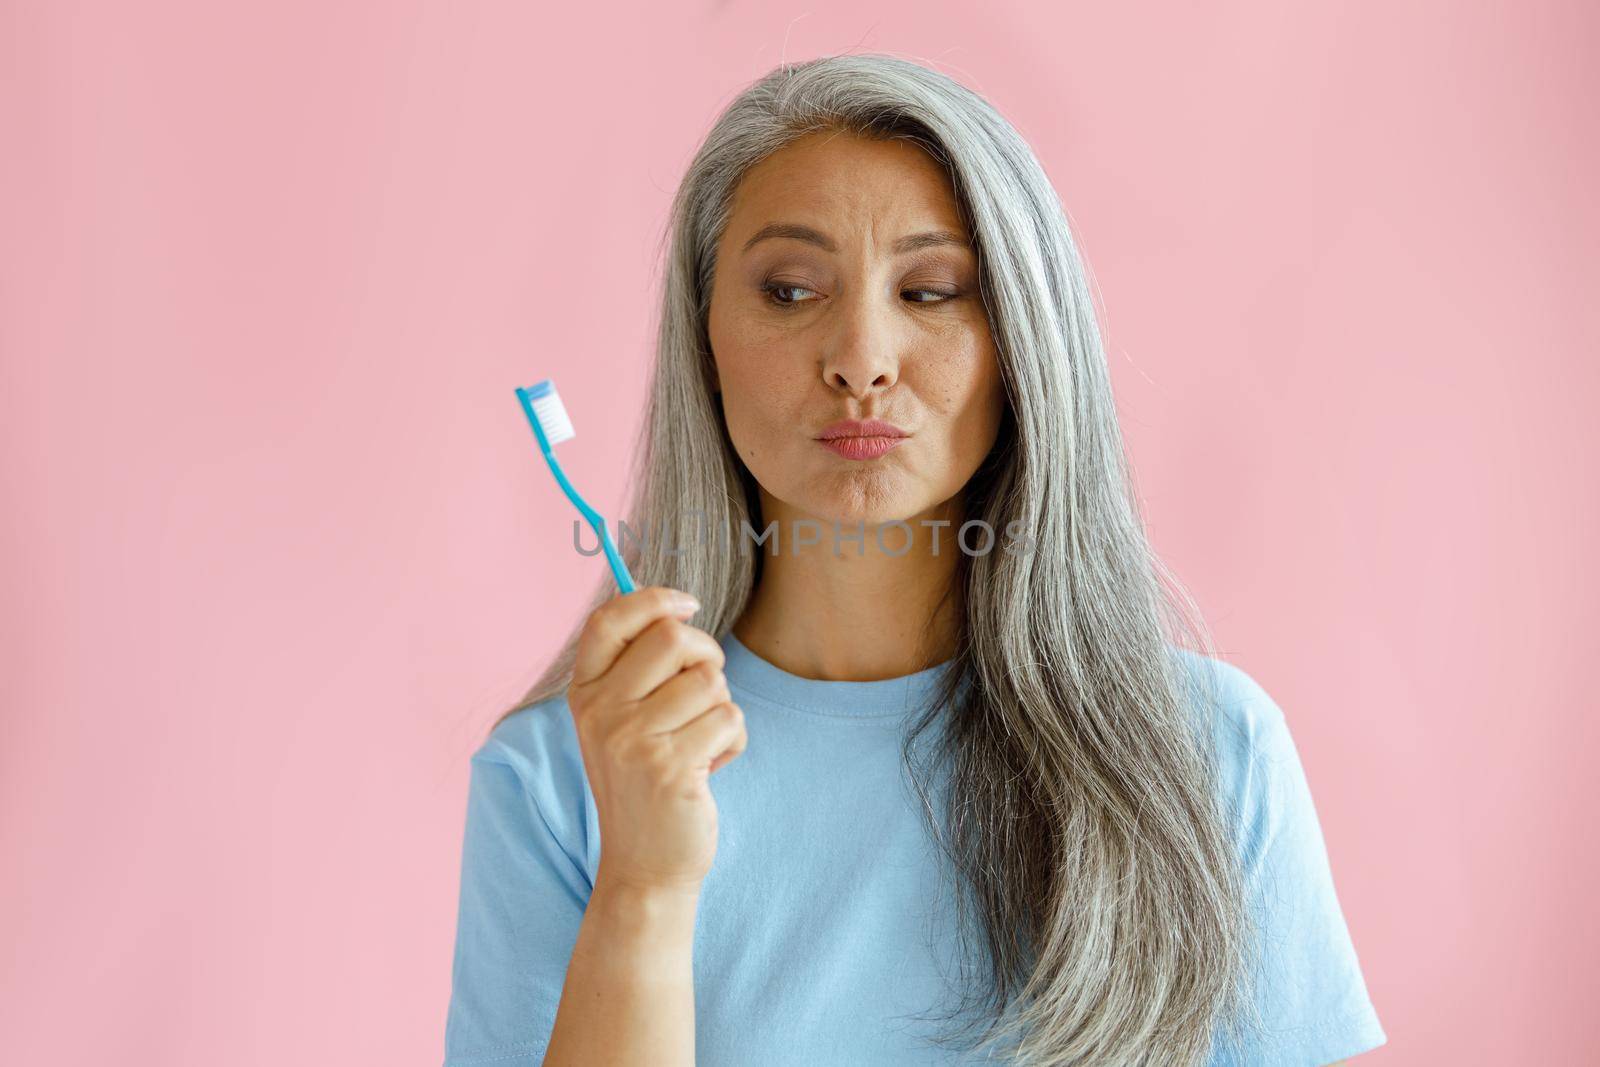 Doubting silver haired mature Asian lady in blue t-shirt looks at toothbrush on pink background in studio. Oral cavity hygiene